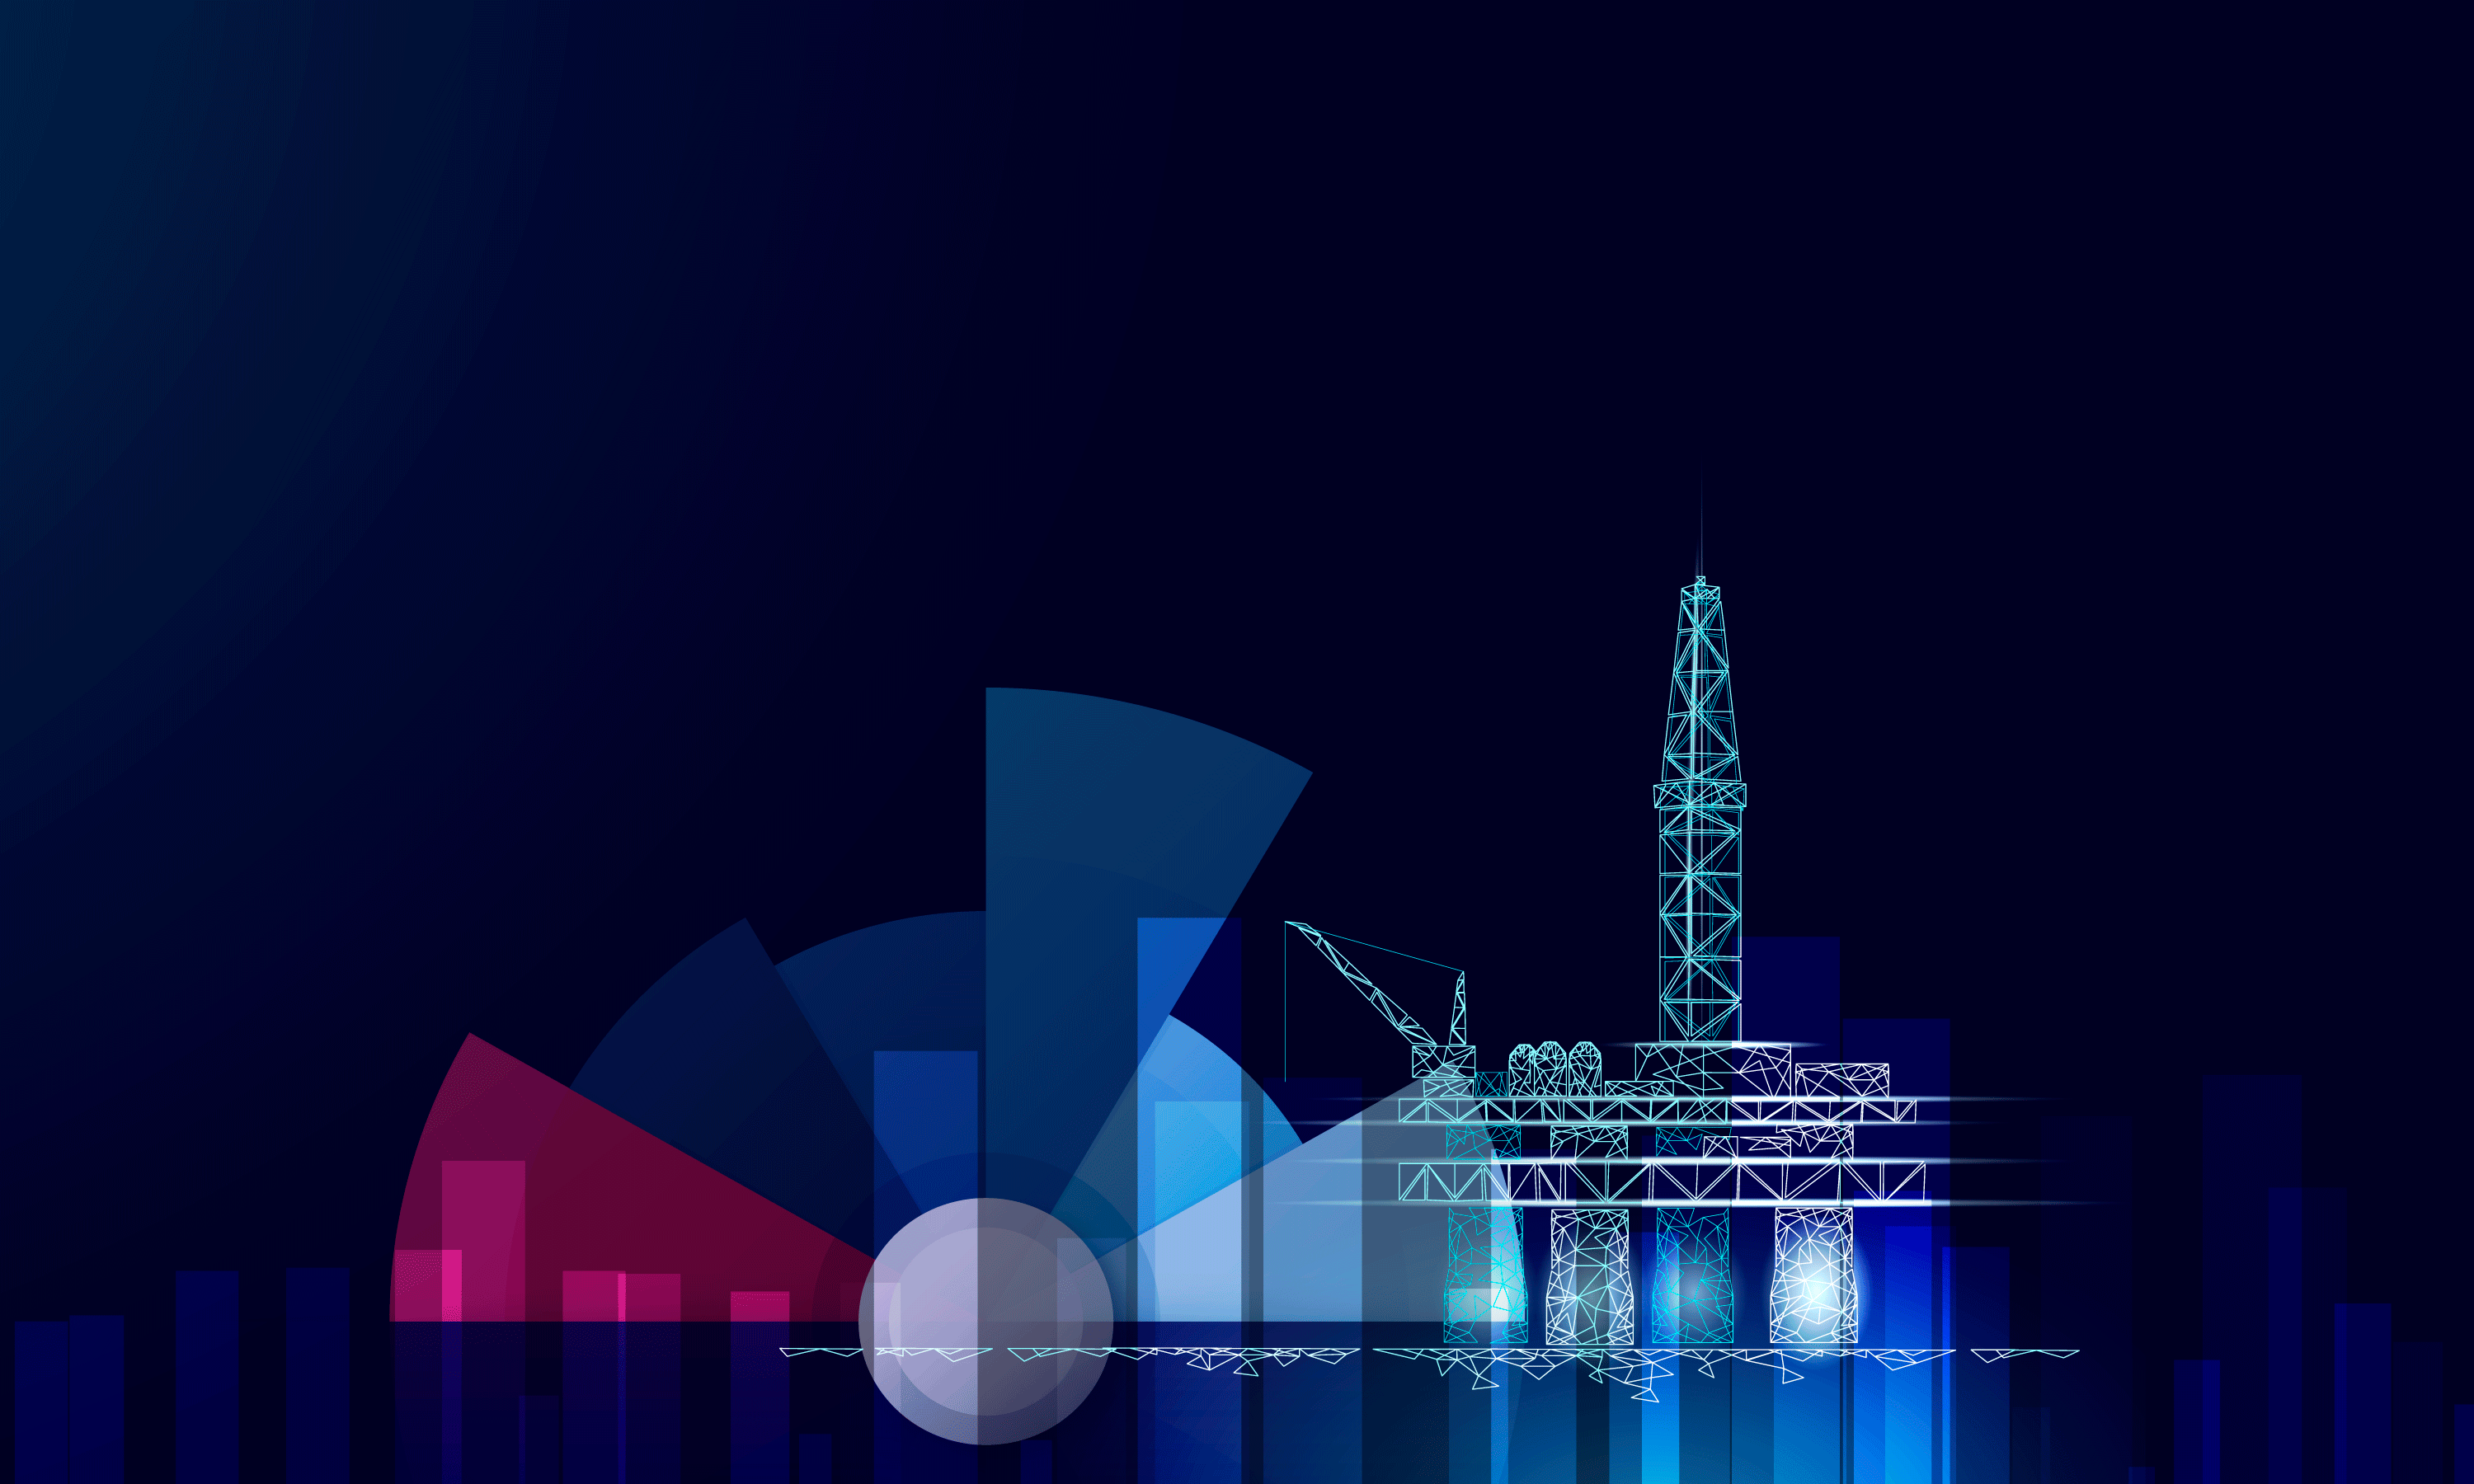 Weekly Global Offshore Rig Counts 2022